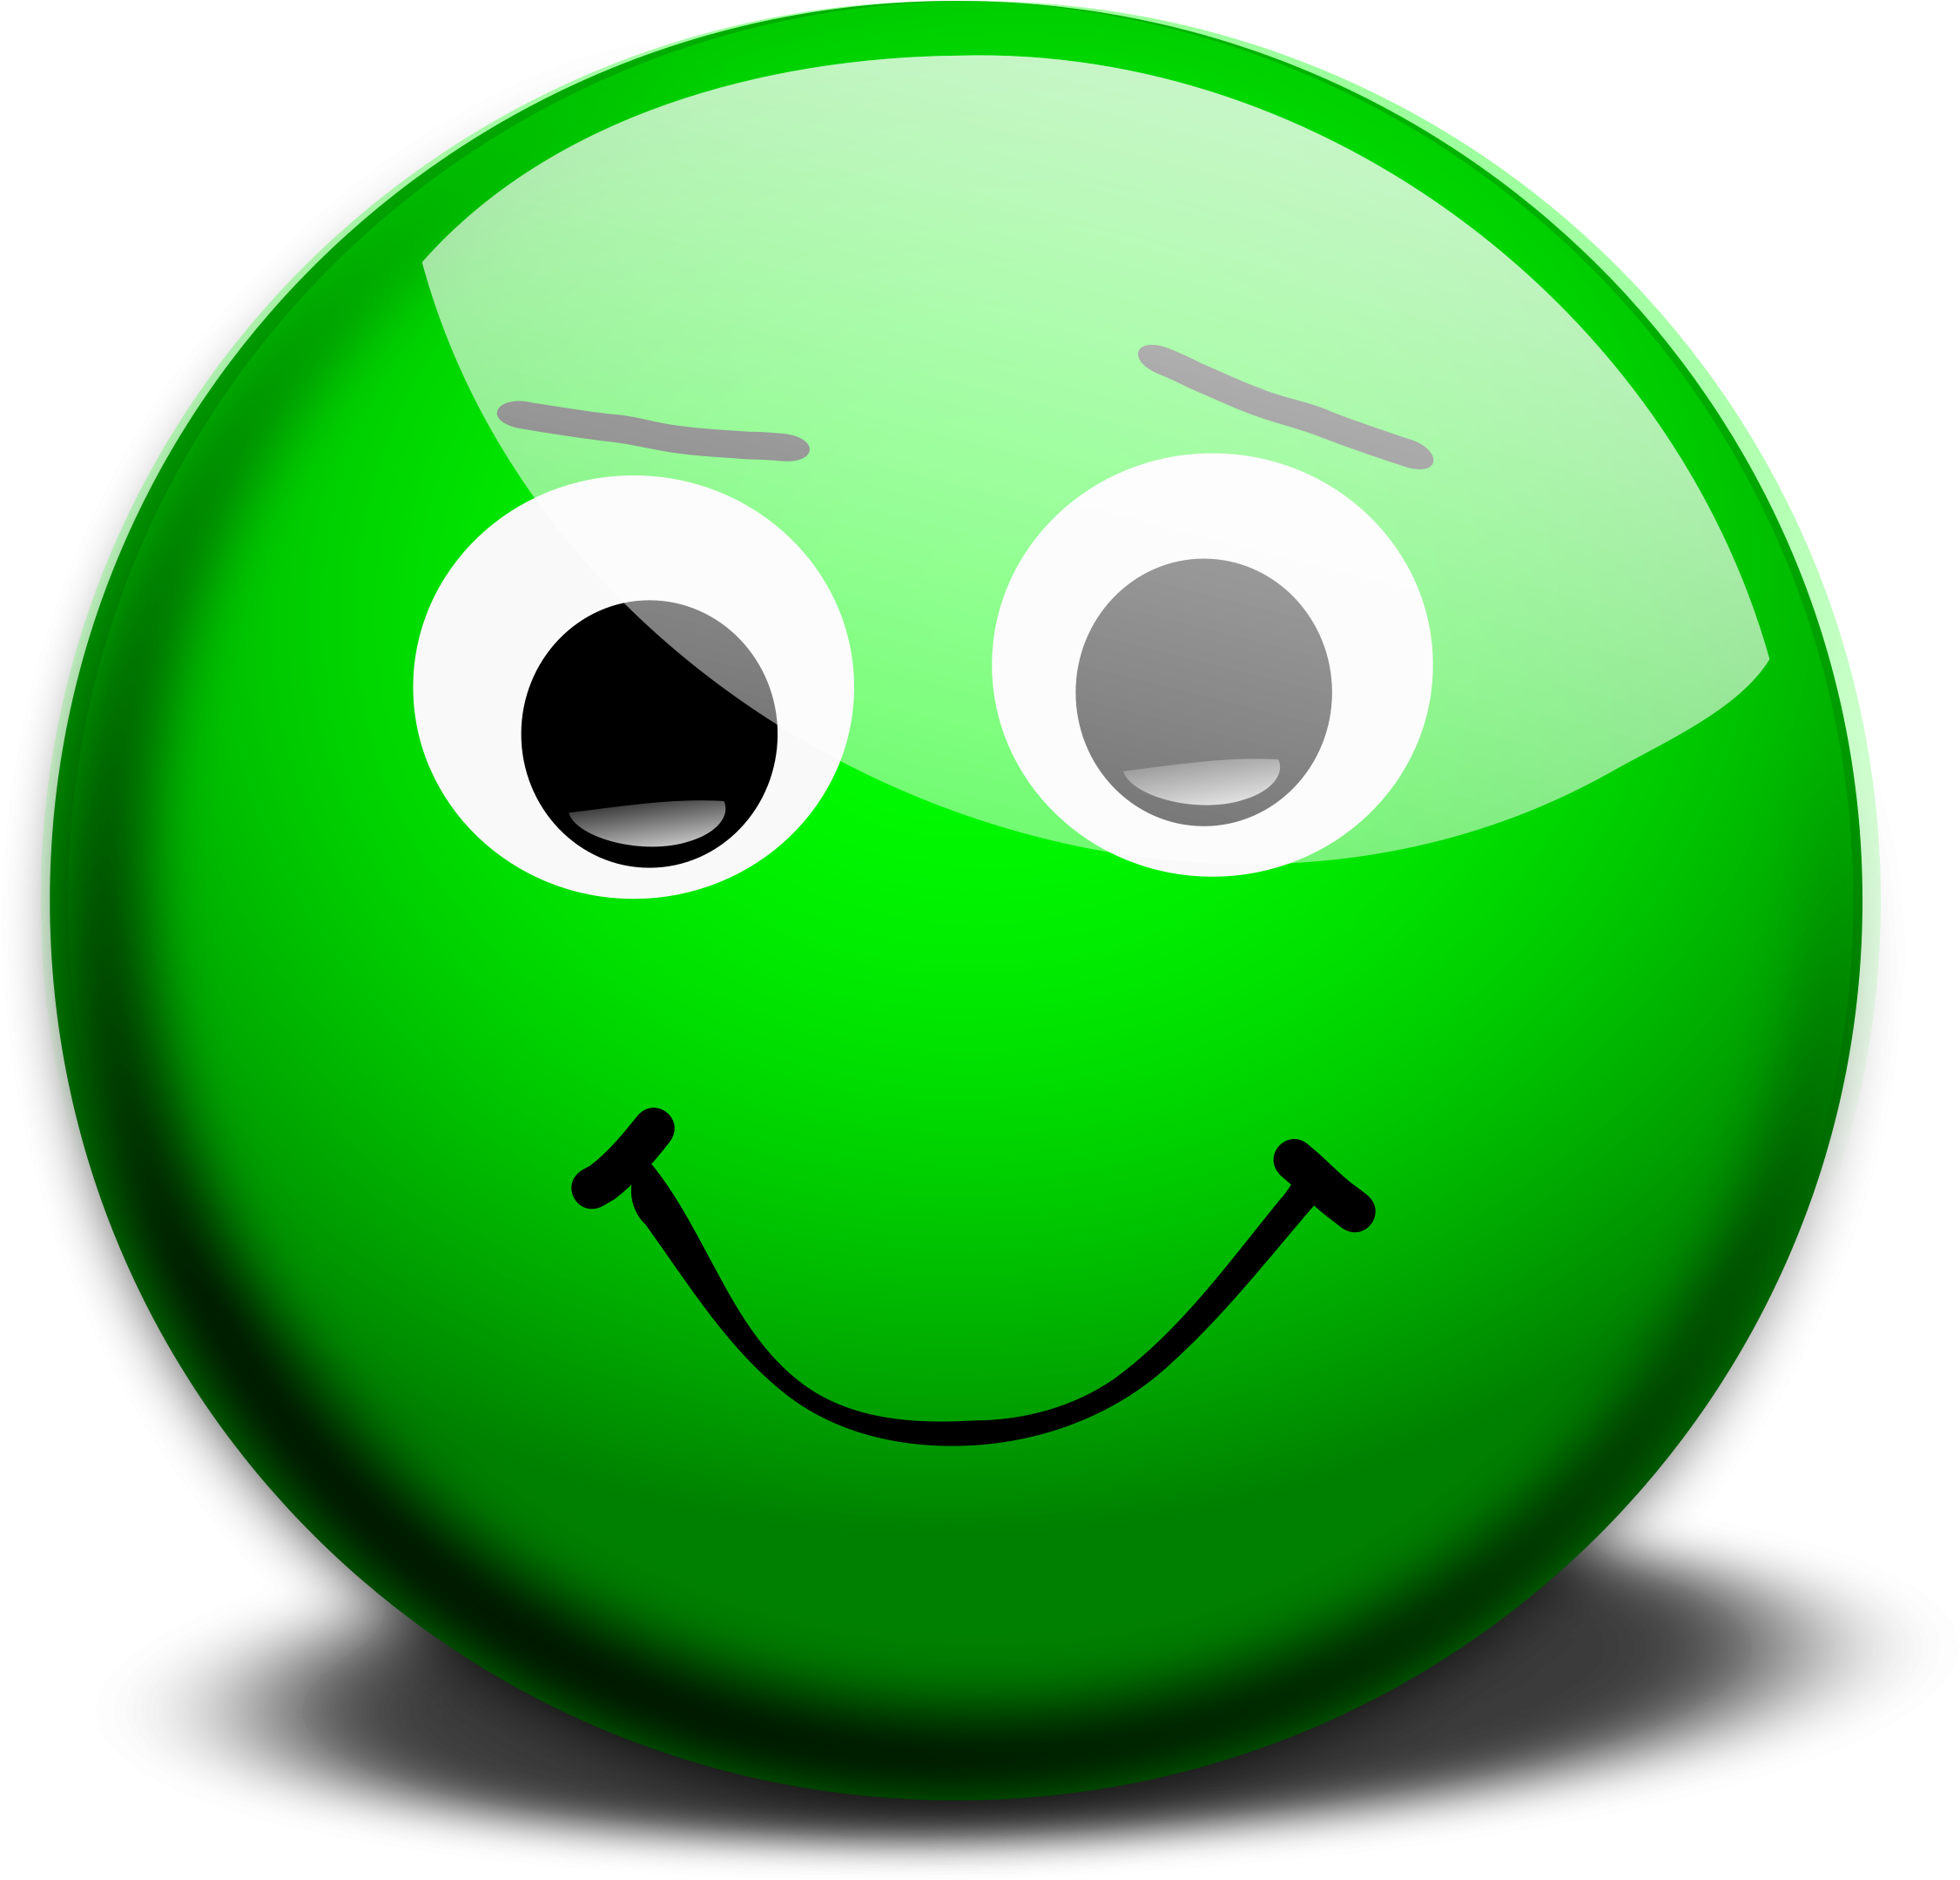 Green Smiley Face Clipart - Best Emoji Dp For Whatsapp (2400x2293)